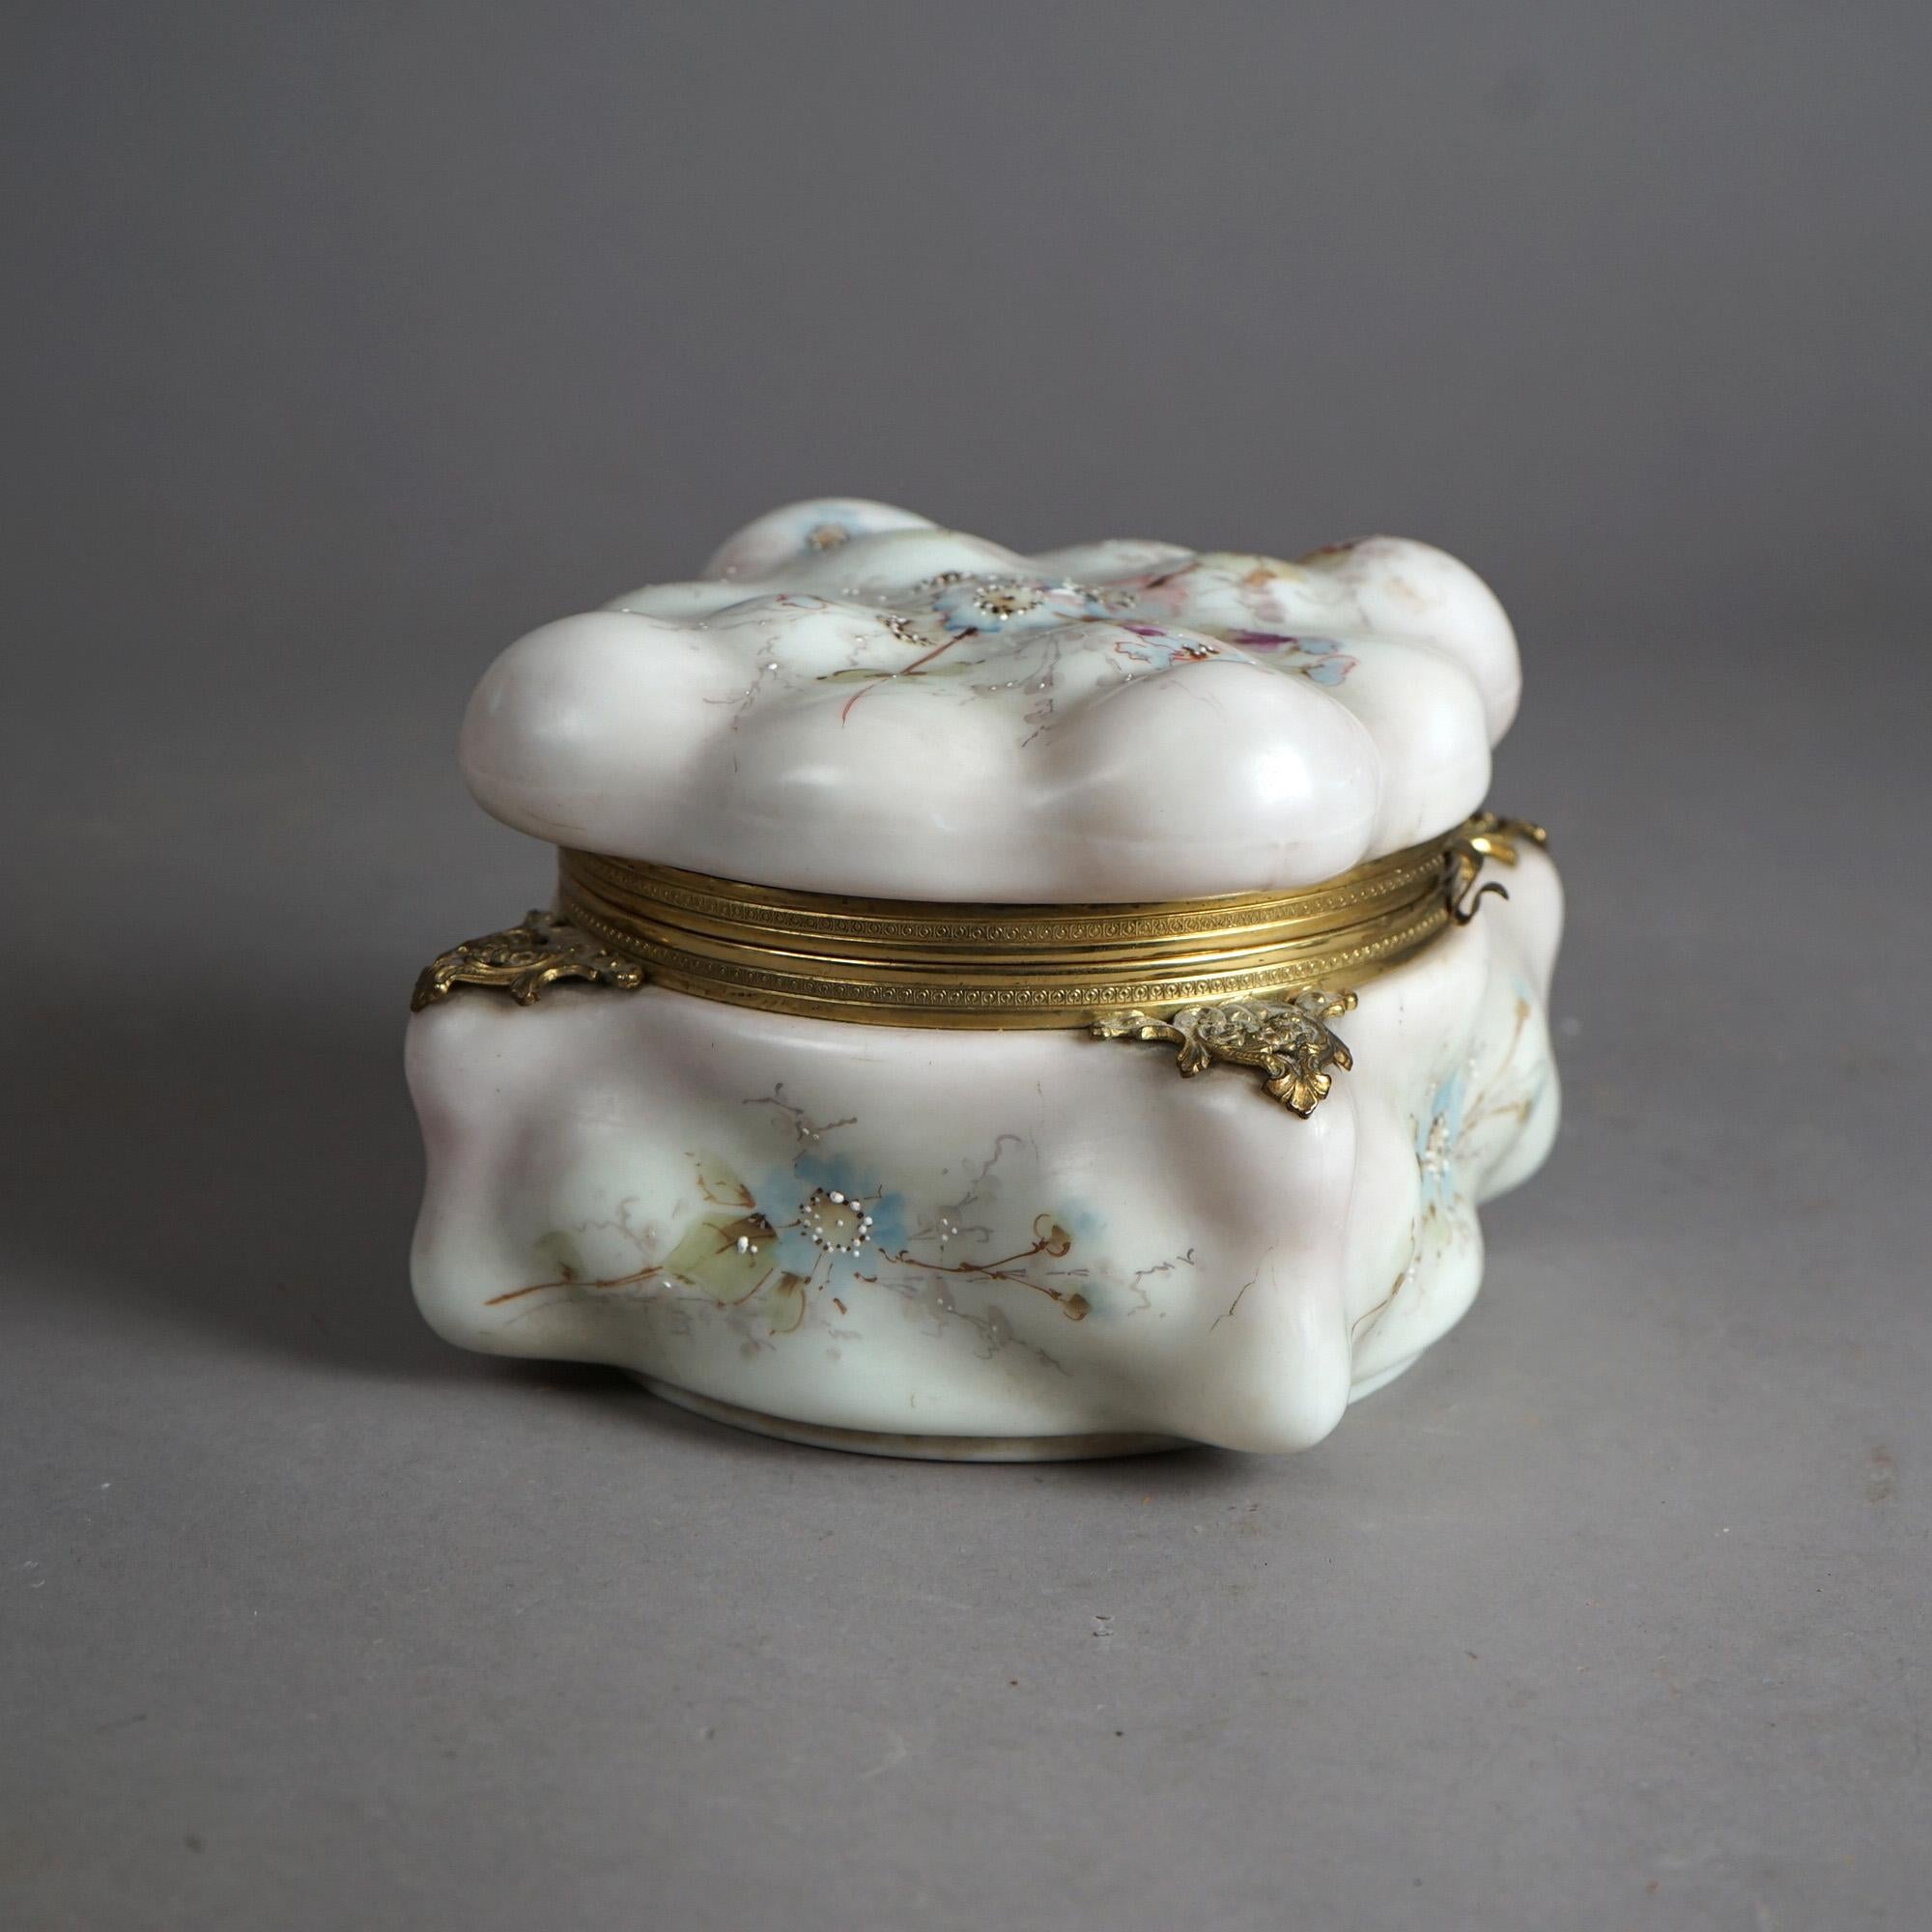 An antique and large Victorian Wavecrest dresser box offers glass construction with enameled floral design and hinged lid opening to satin lined interior, 19th century

Measures - 5.5